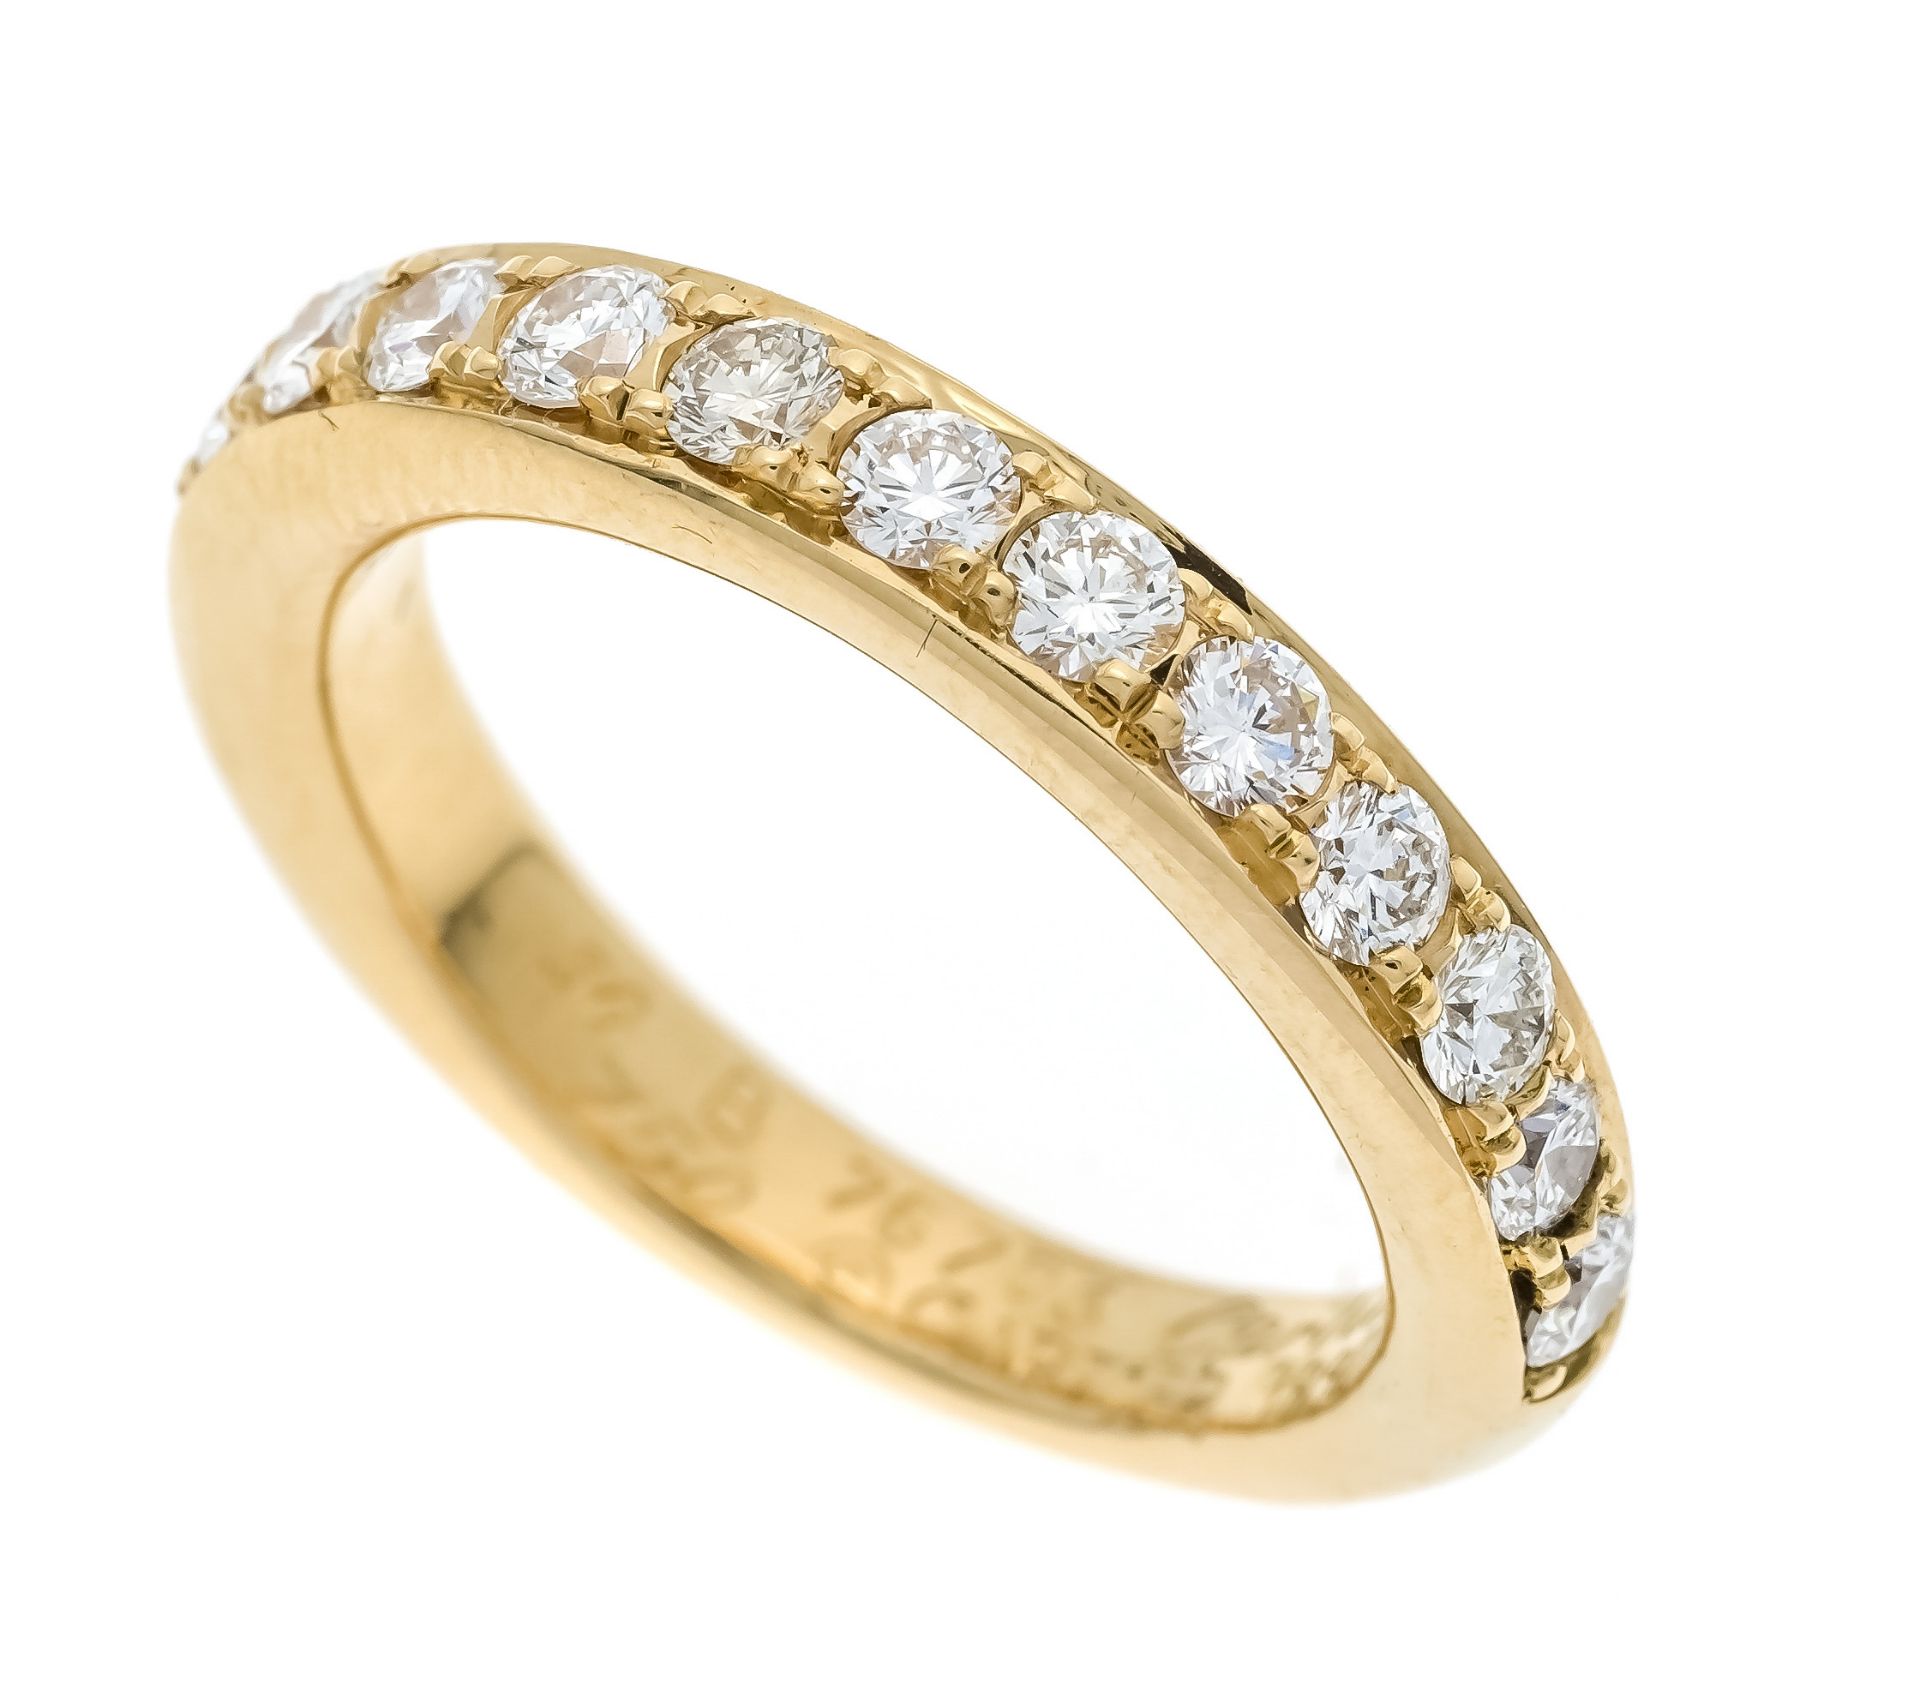 Cartier memory ring GG 750/000 with 15 brilliant-cut diamonds, total 1.10 ct TW/VVS, RG 56,